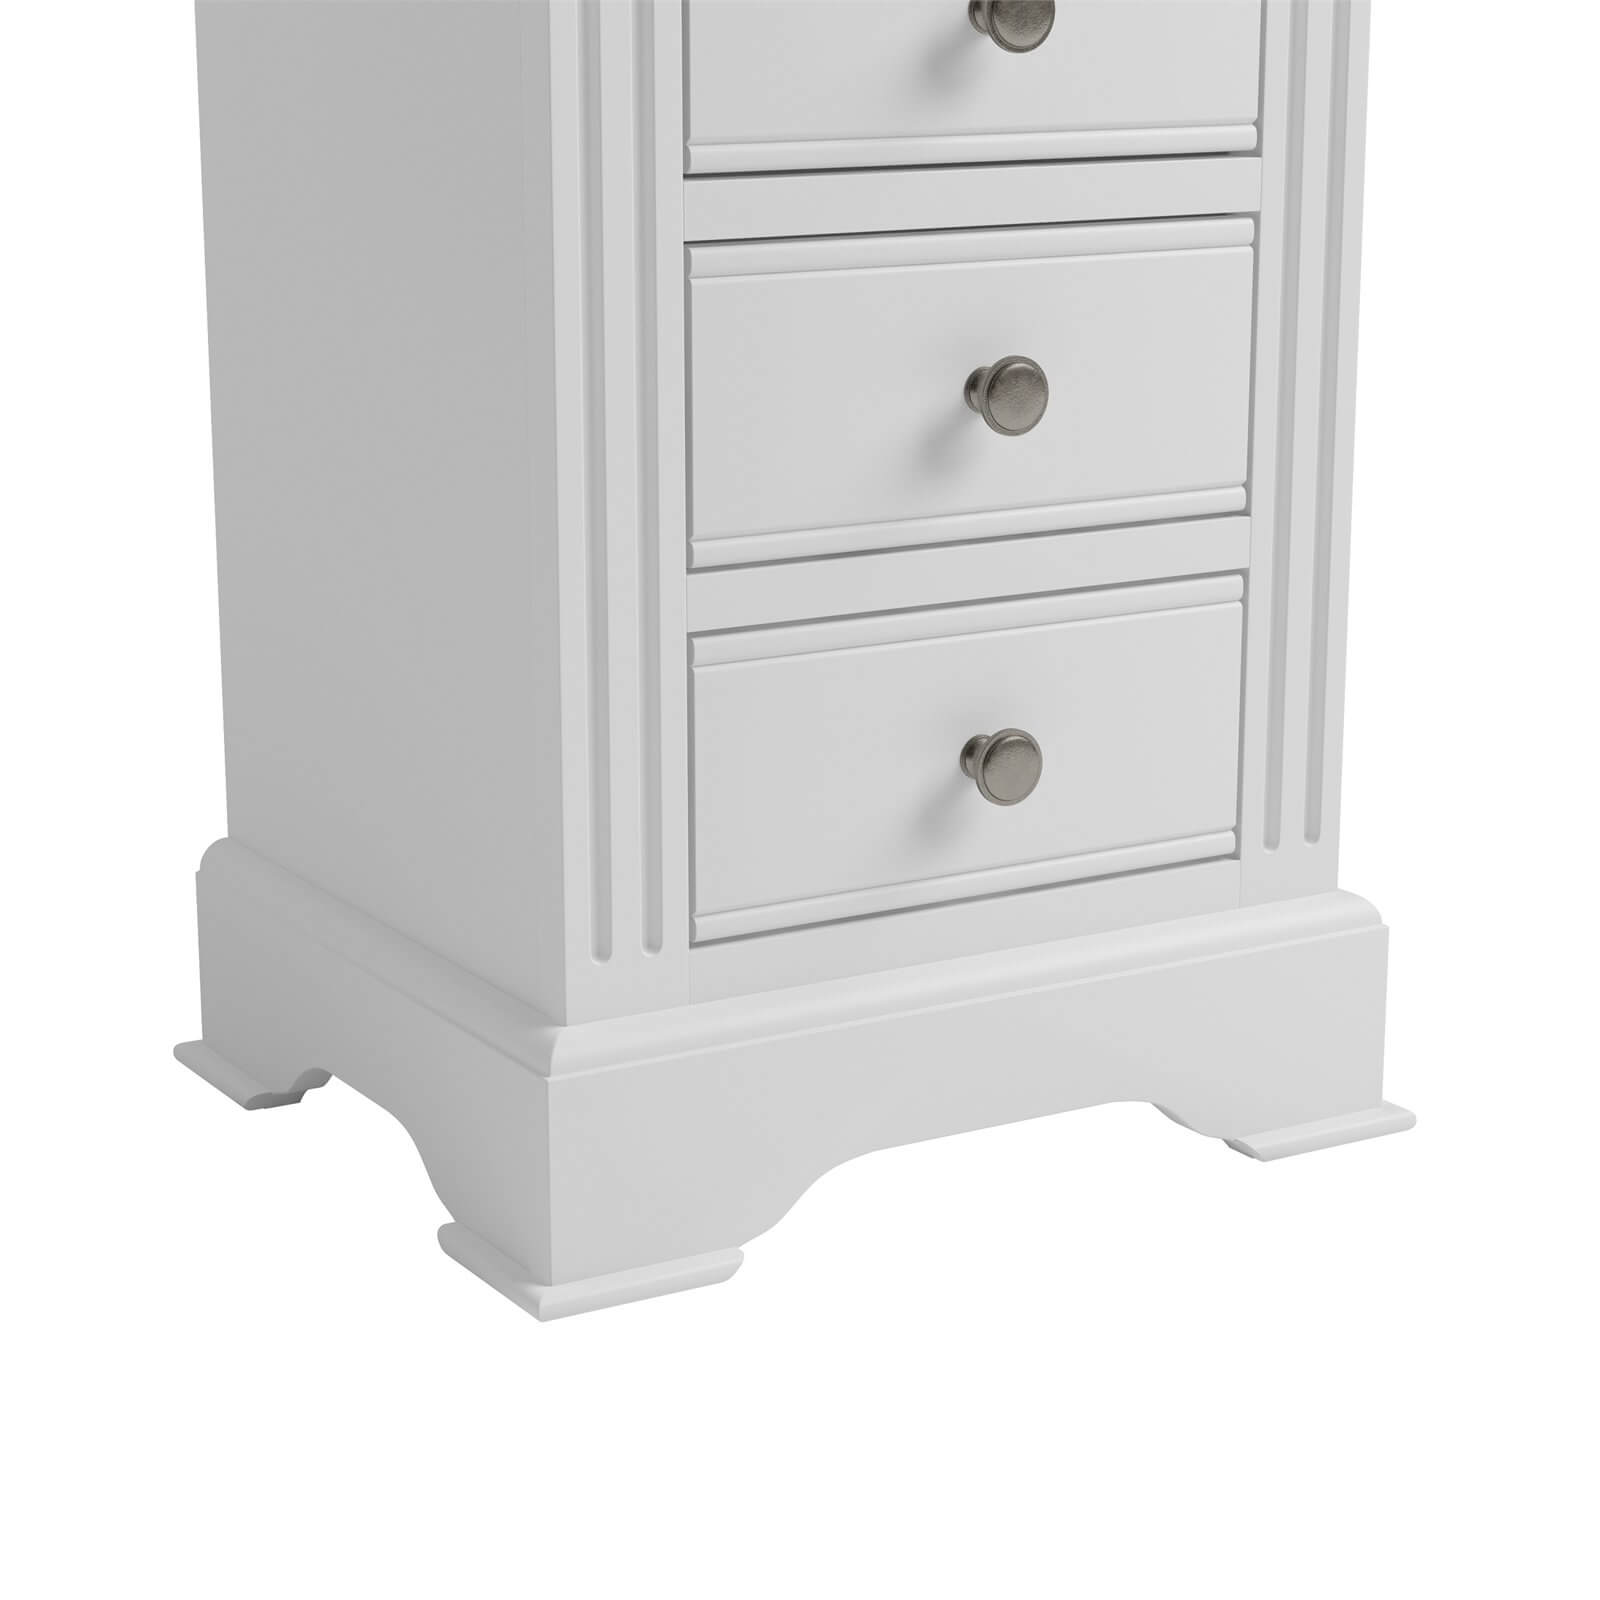 Camborne Large Bedside Table - White